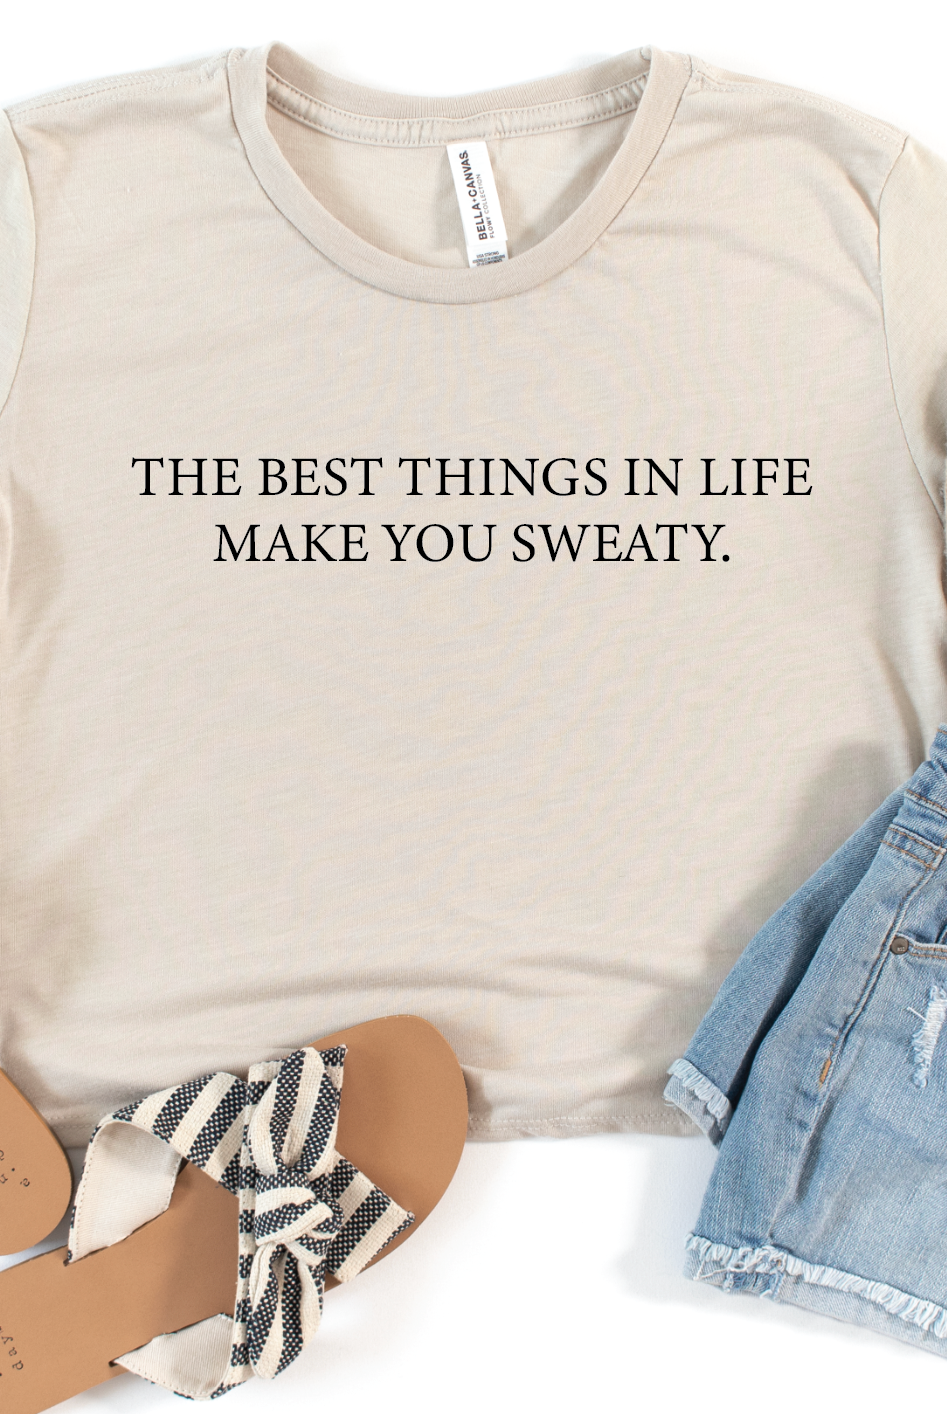 The Best Things in Life Make You Sweaty Cropped tee-Graphic Tee- Simply Simpson's Boutique is a Women's Online Fashion Boutique Located in Jupiter, Florida